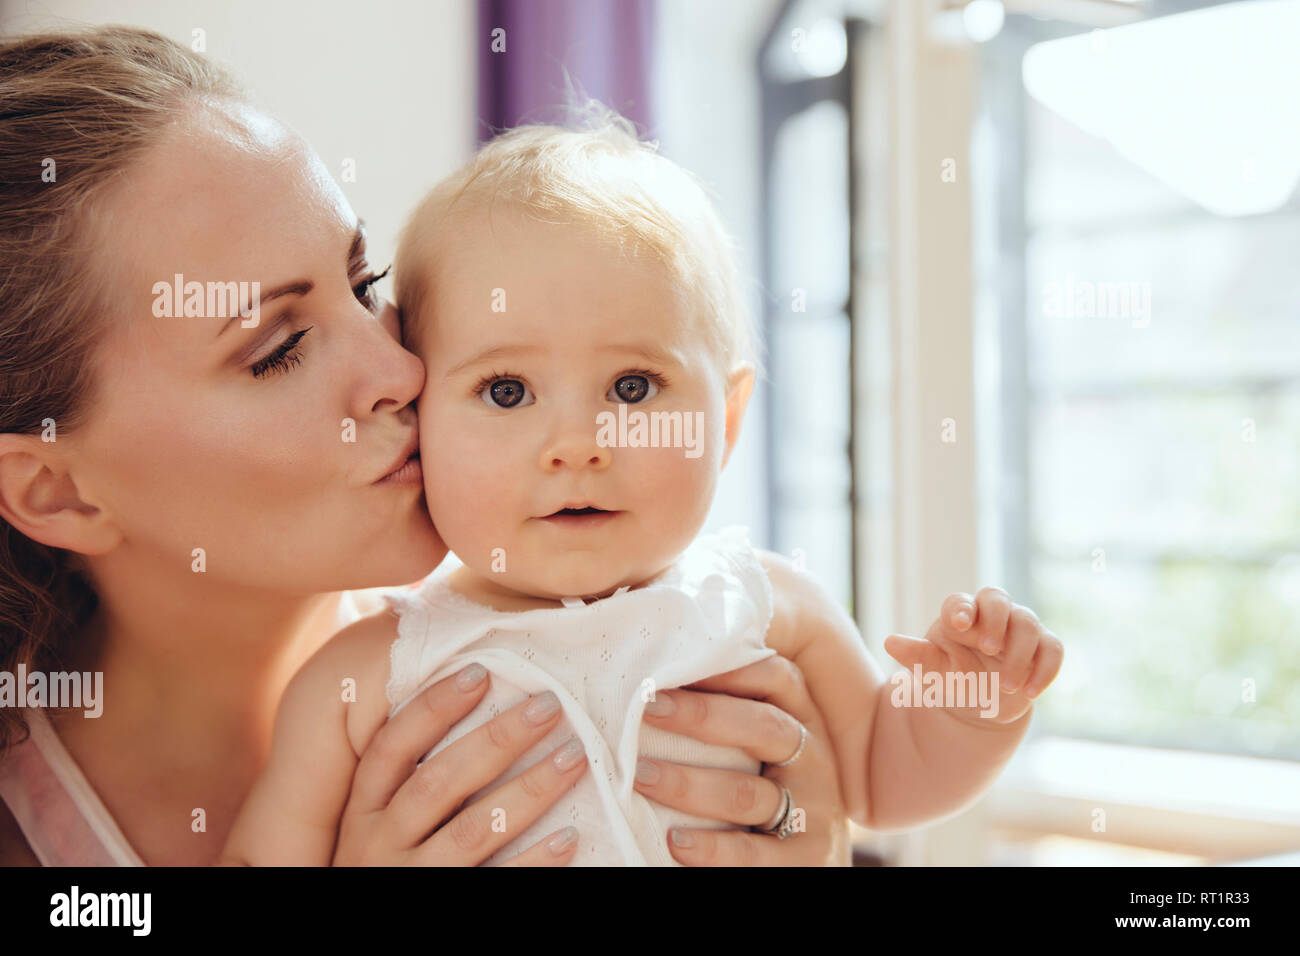 Mother kissing her baby on cheek Stock Photo